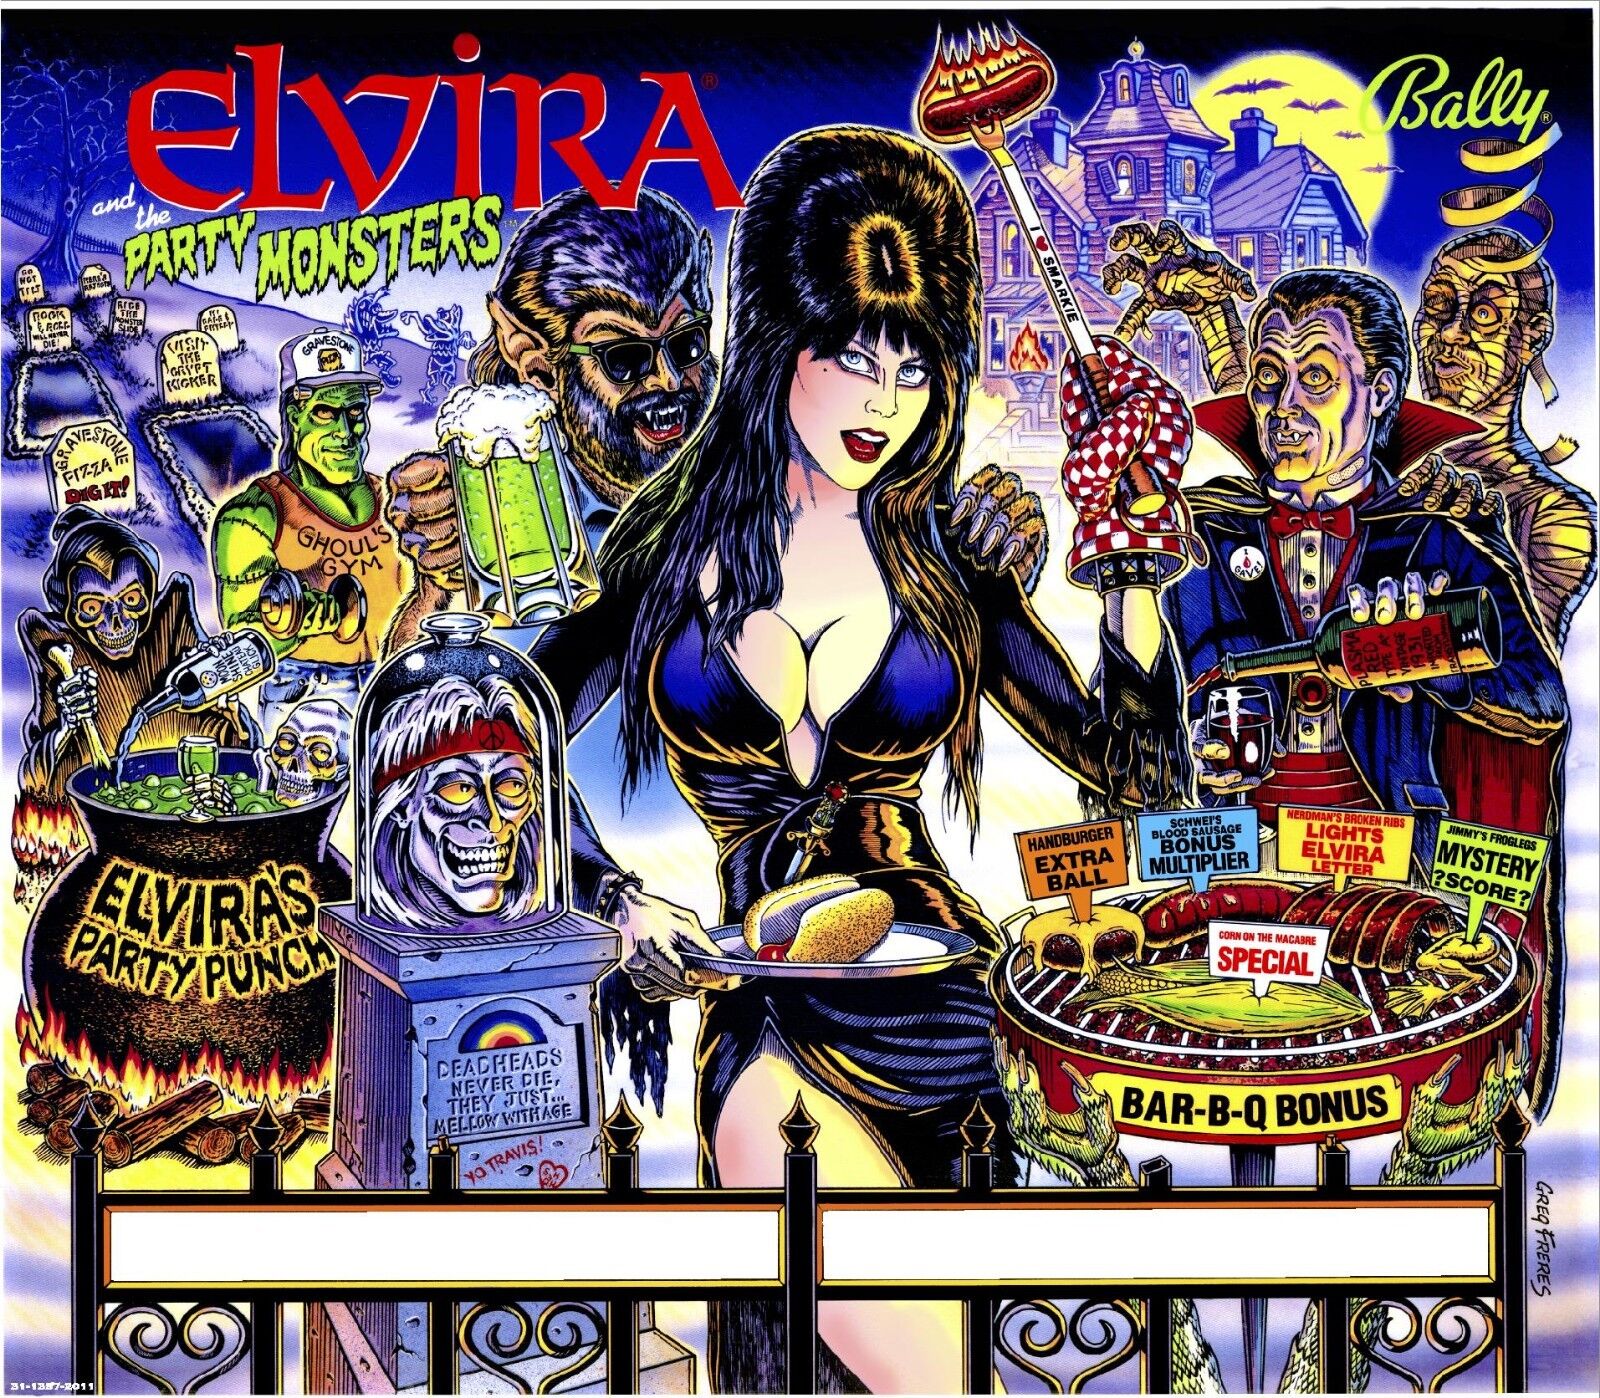 Elvira and the Party Monsters (Bally, 1989) Backglass